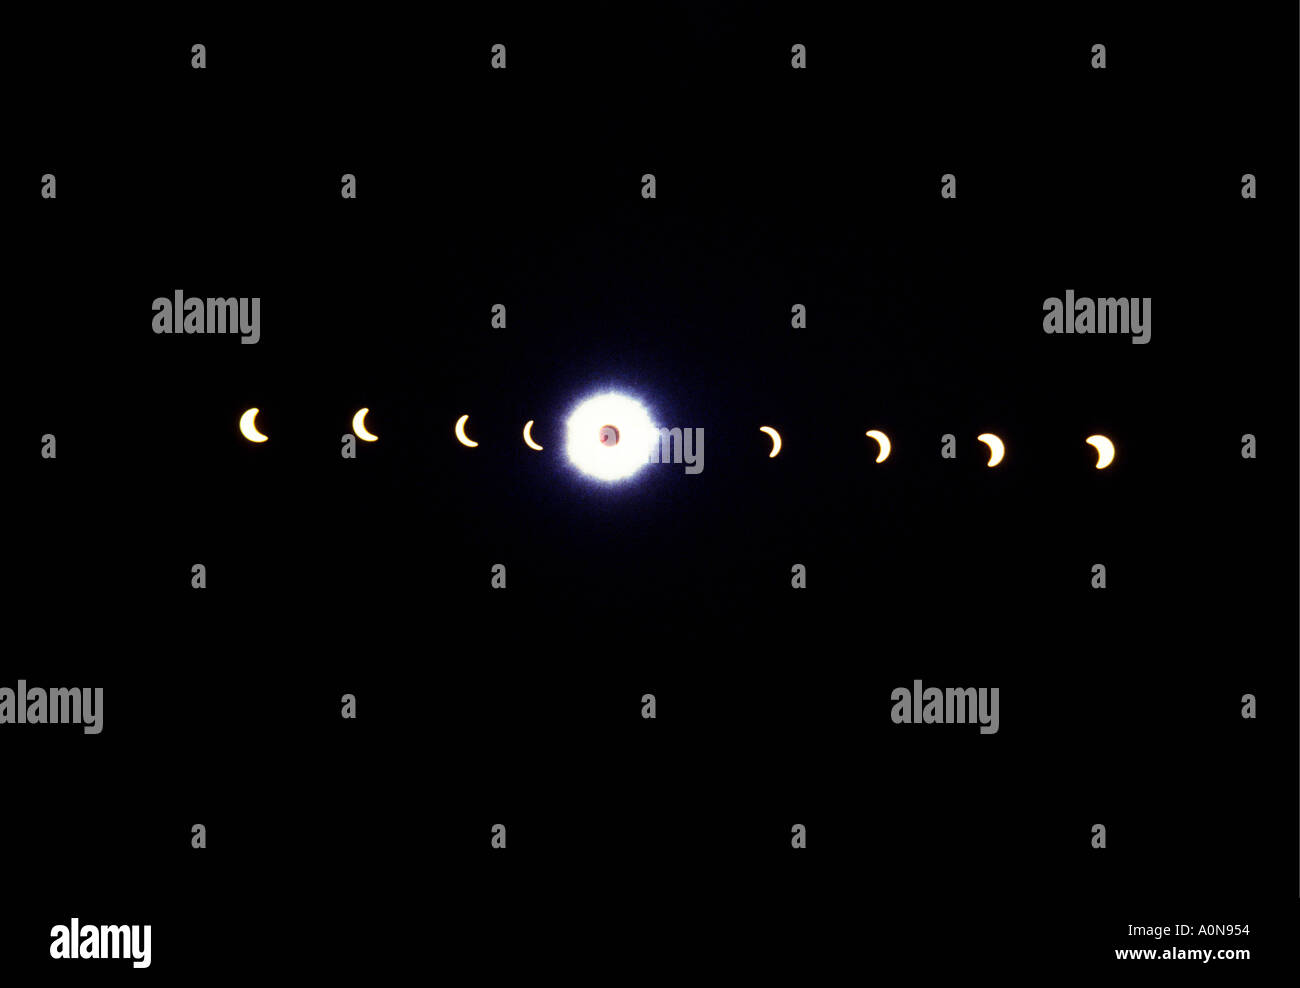 Time lapse photograph of the total eclipse of the sun showing the phases before during and after totality Stock Photo